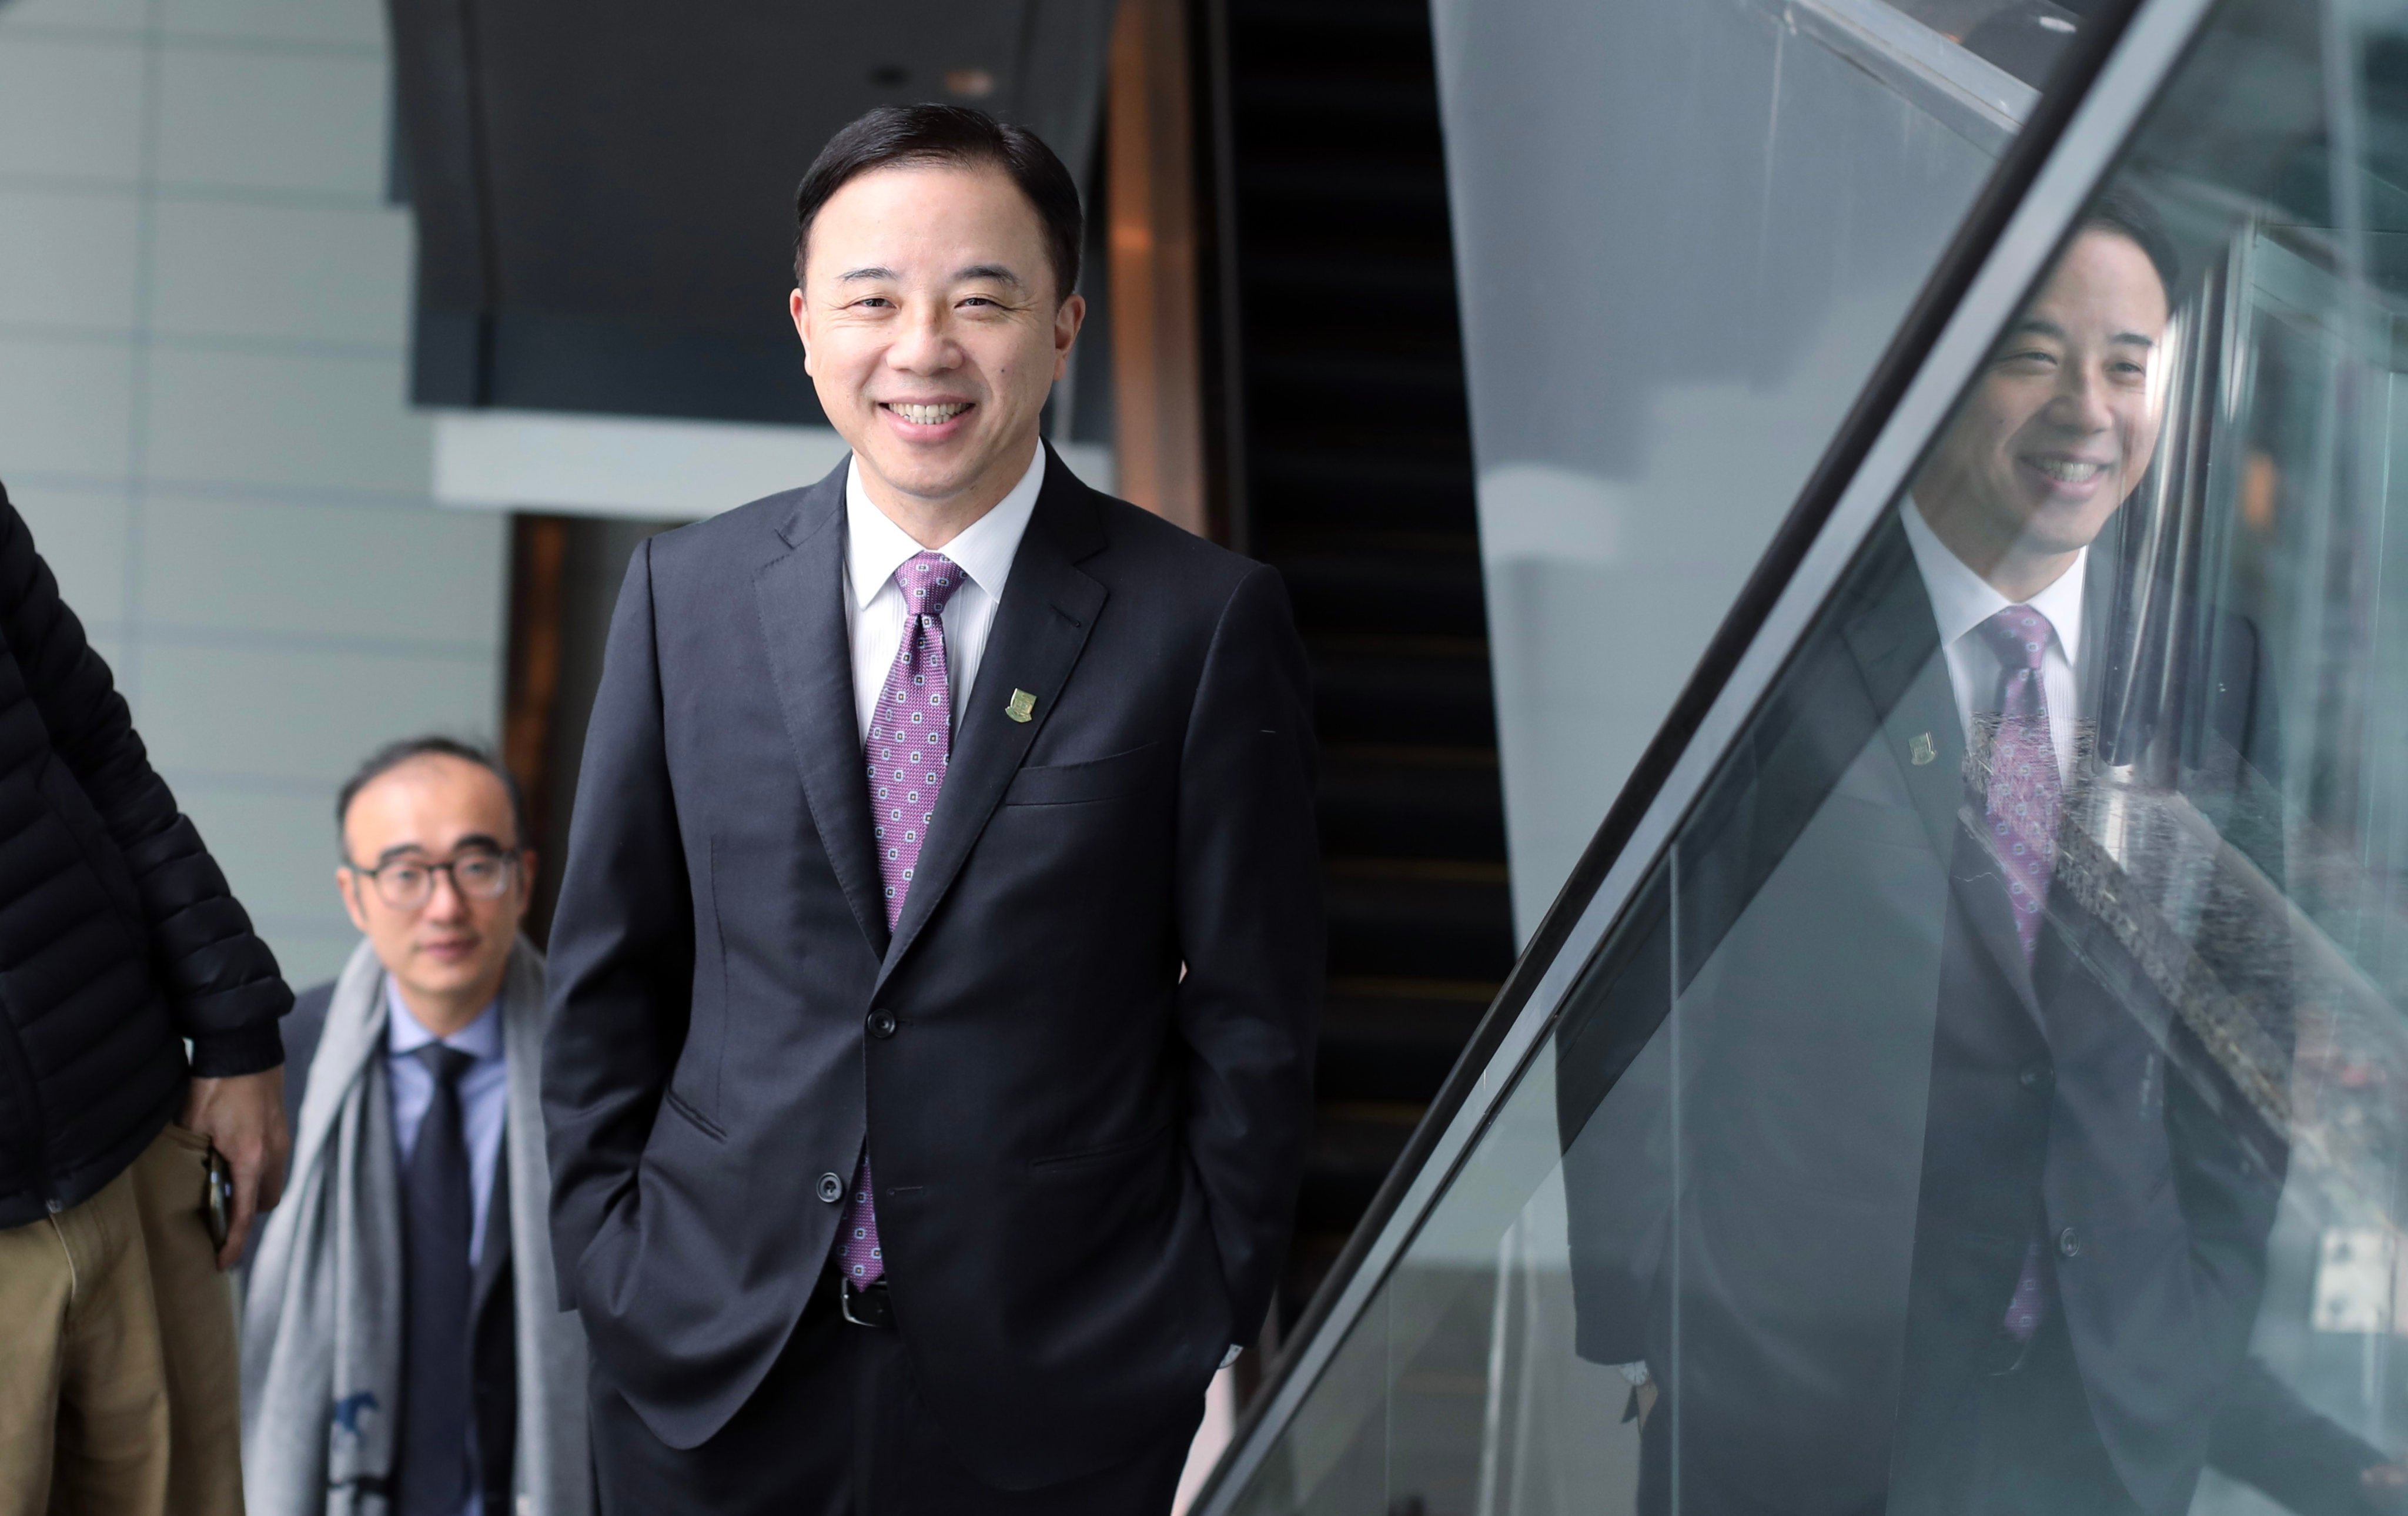 HKU head Zhang Xiang is accused of skipping board meetings and failing to provide details about 16 business trips. Photo: Xiaomei Chen